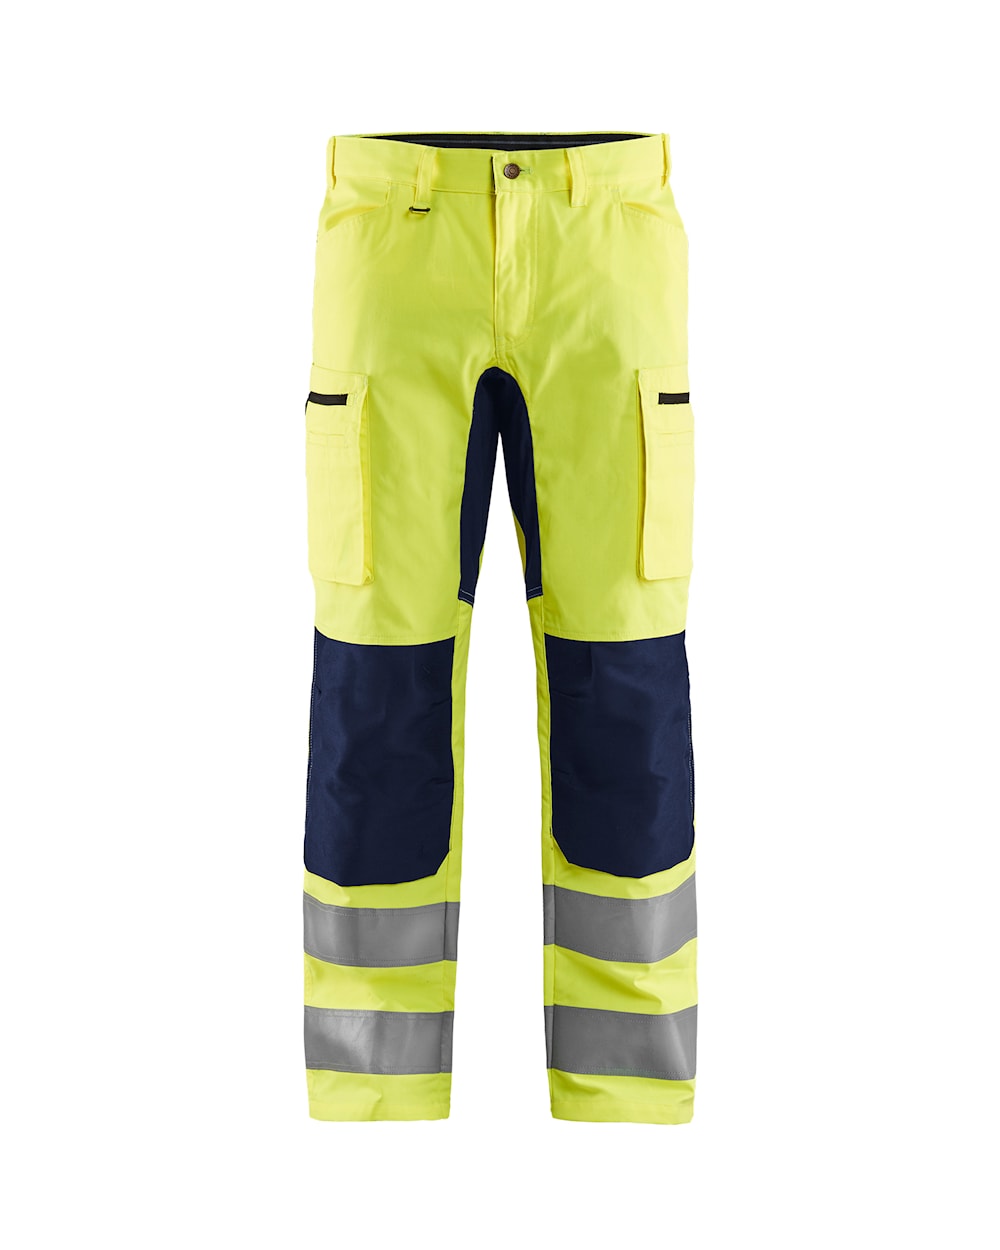 Blaklader Hi-Vis Trousers with Stretch 1585 - Hi-Vis Yellow/Navy Blue